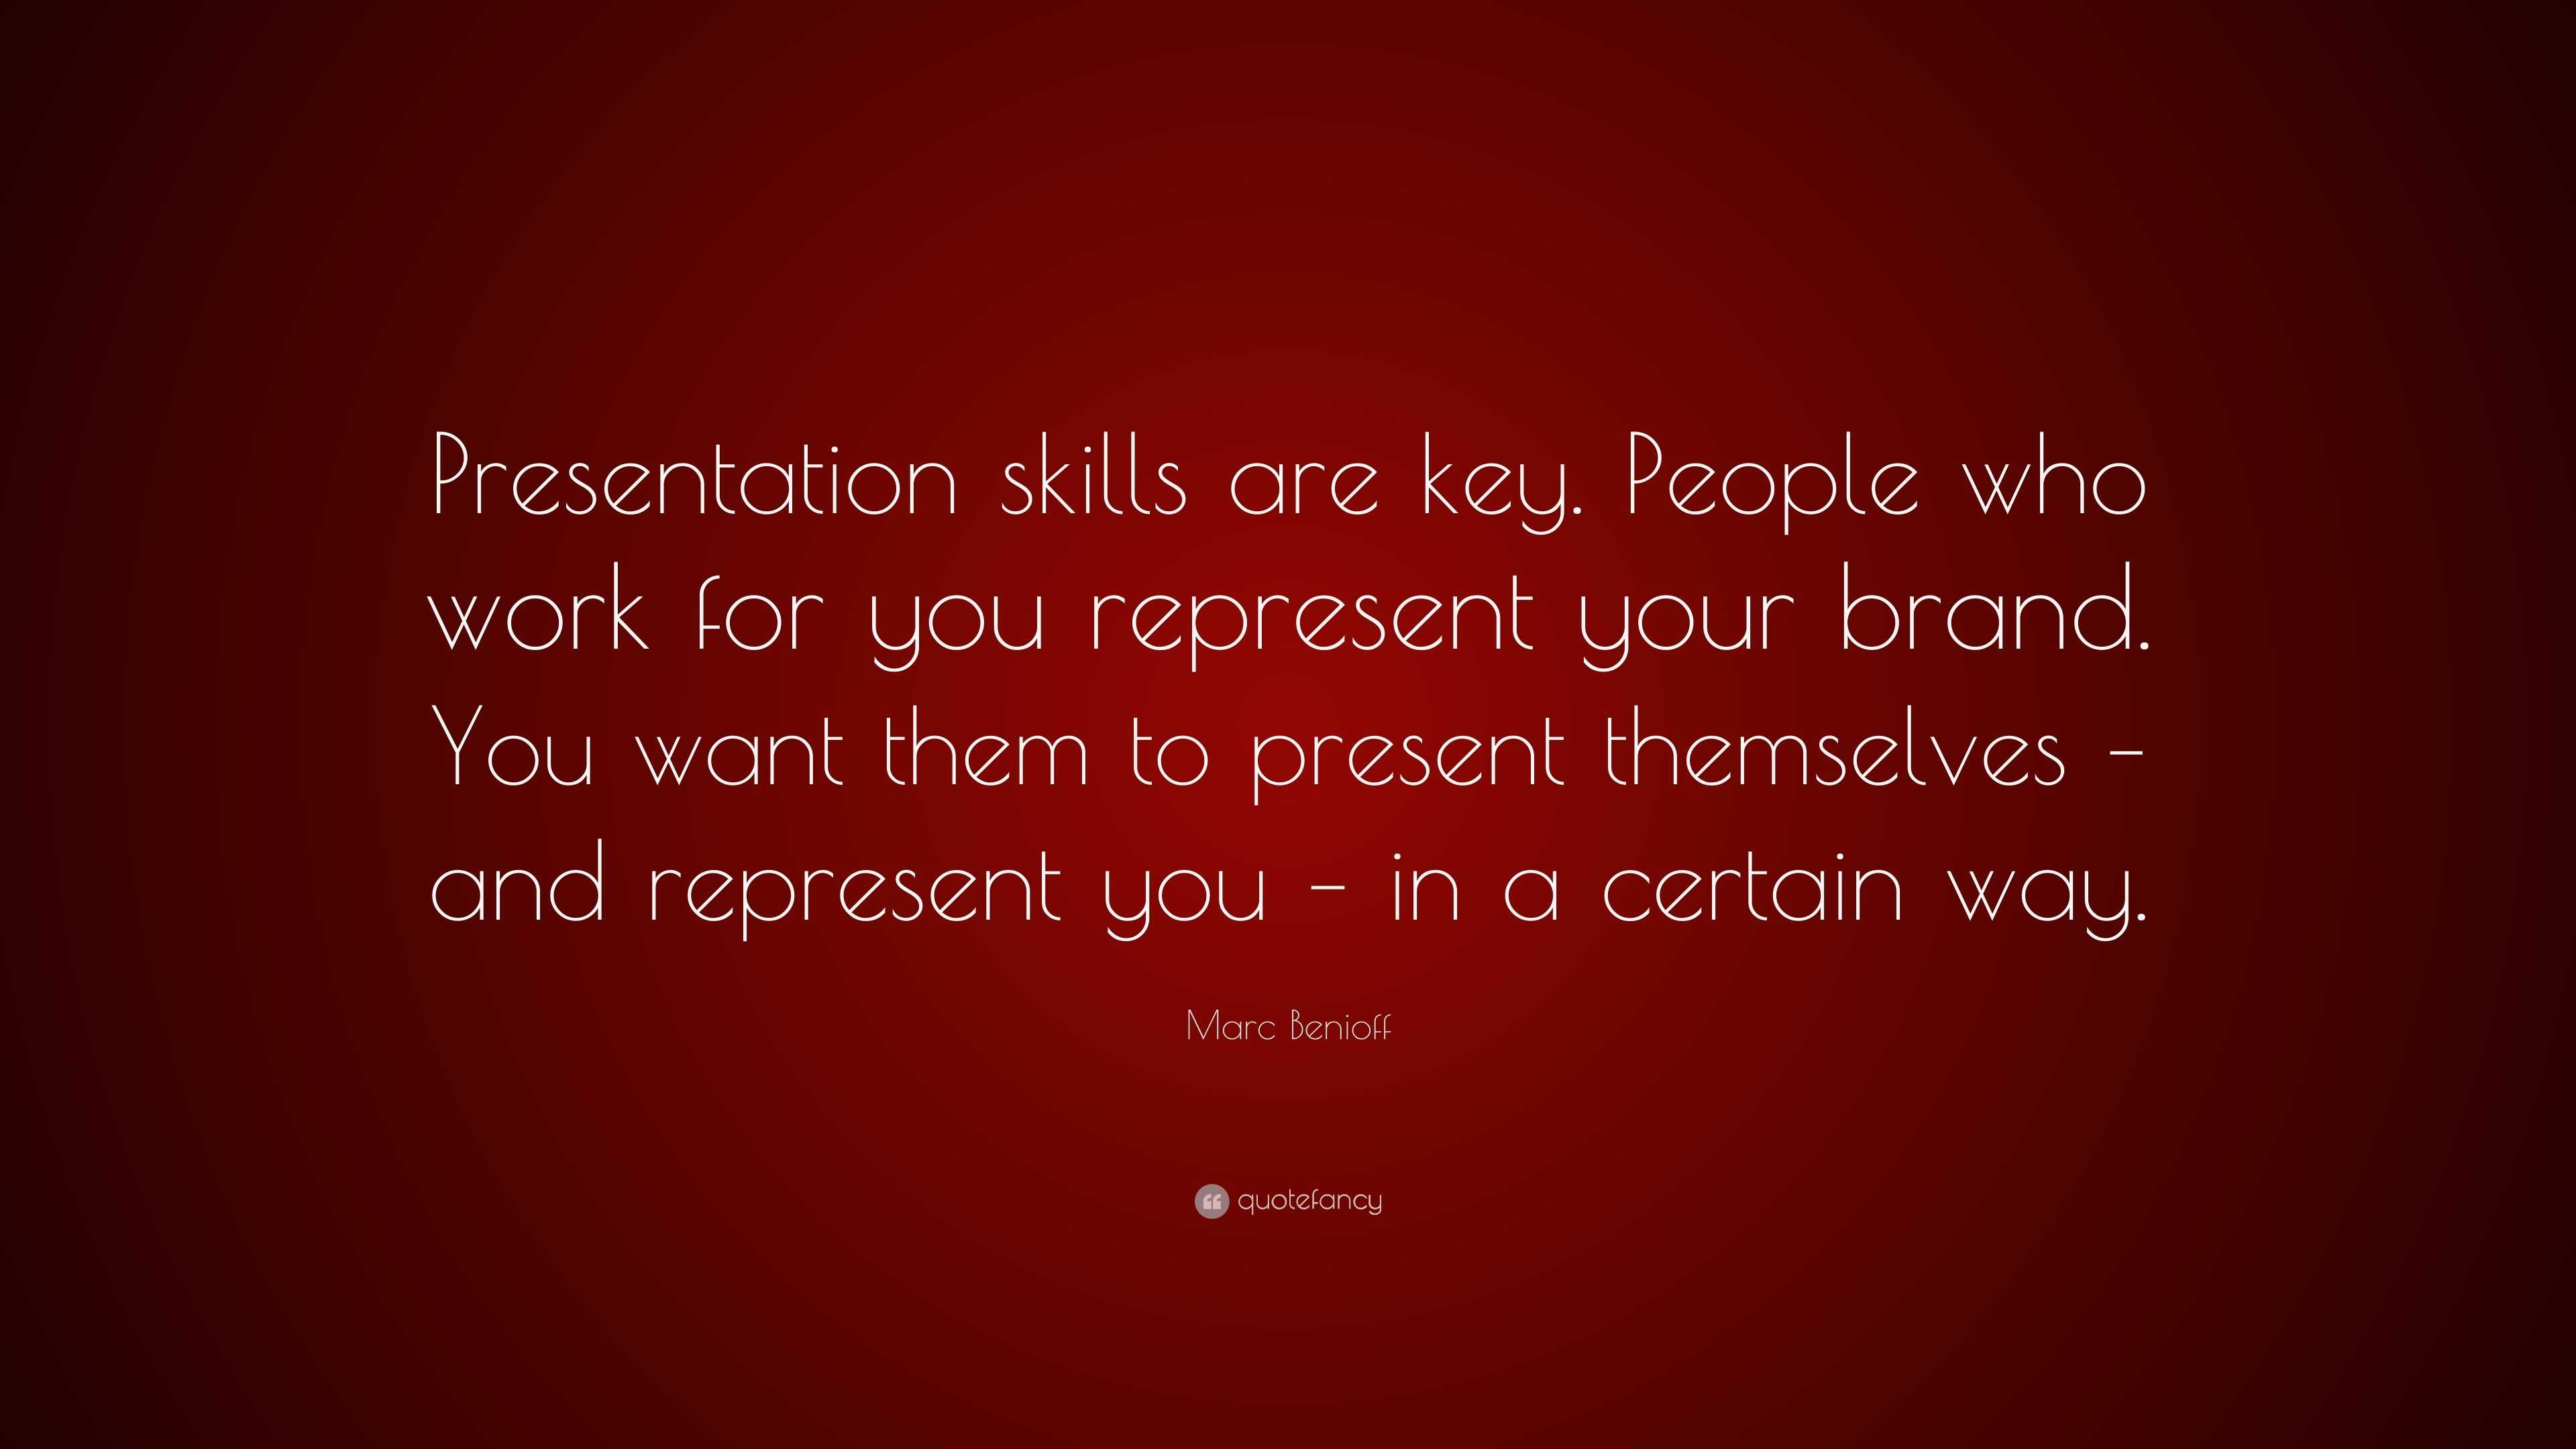 quote about presentation skills